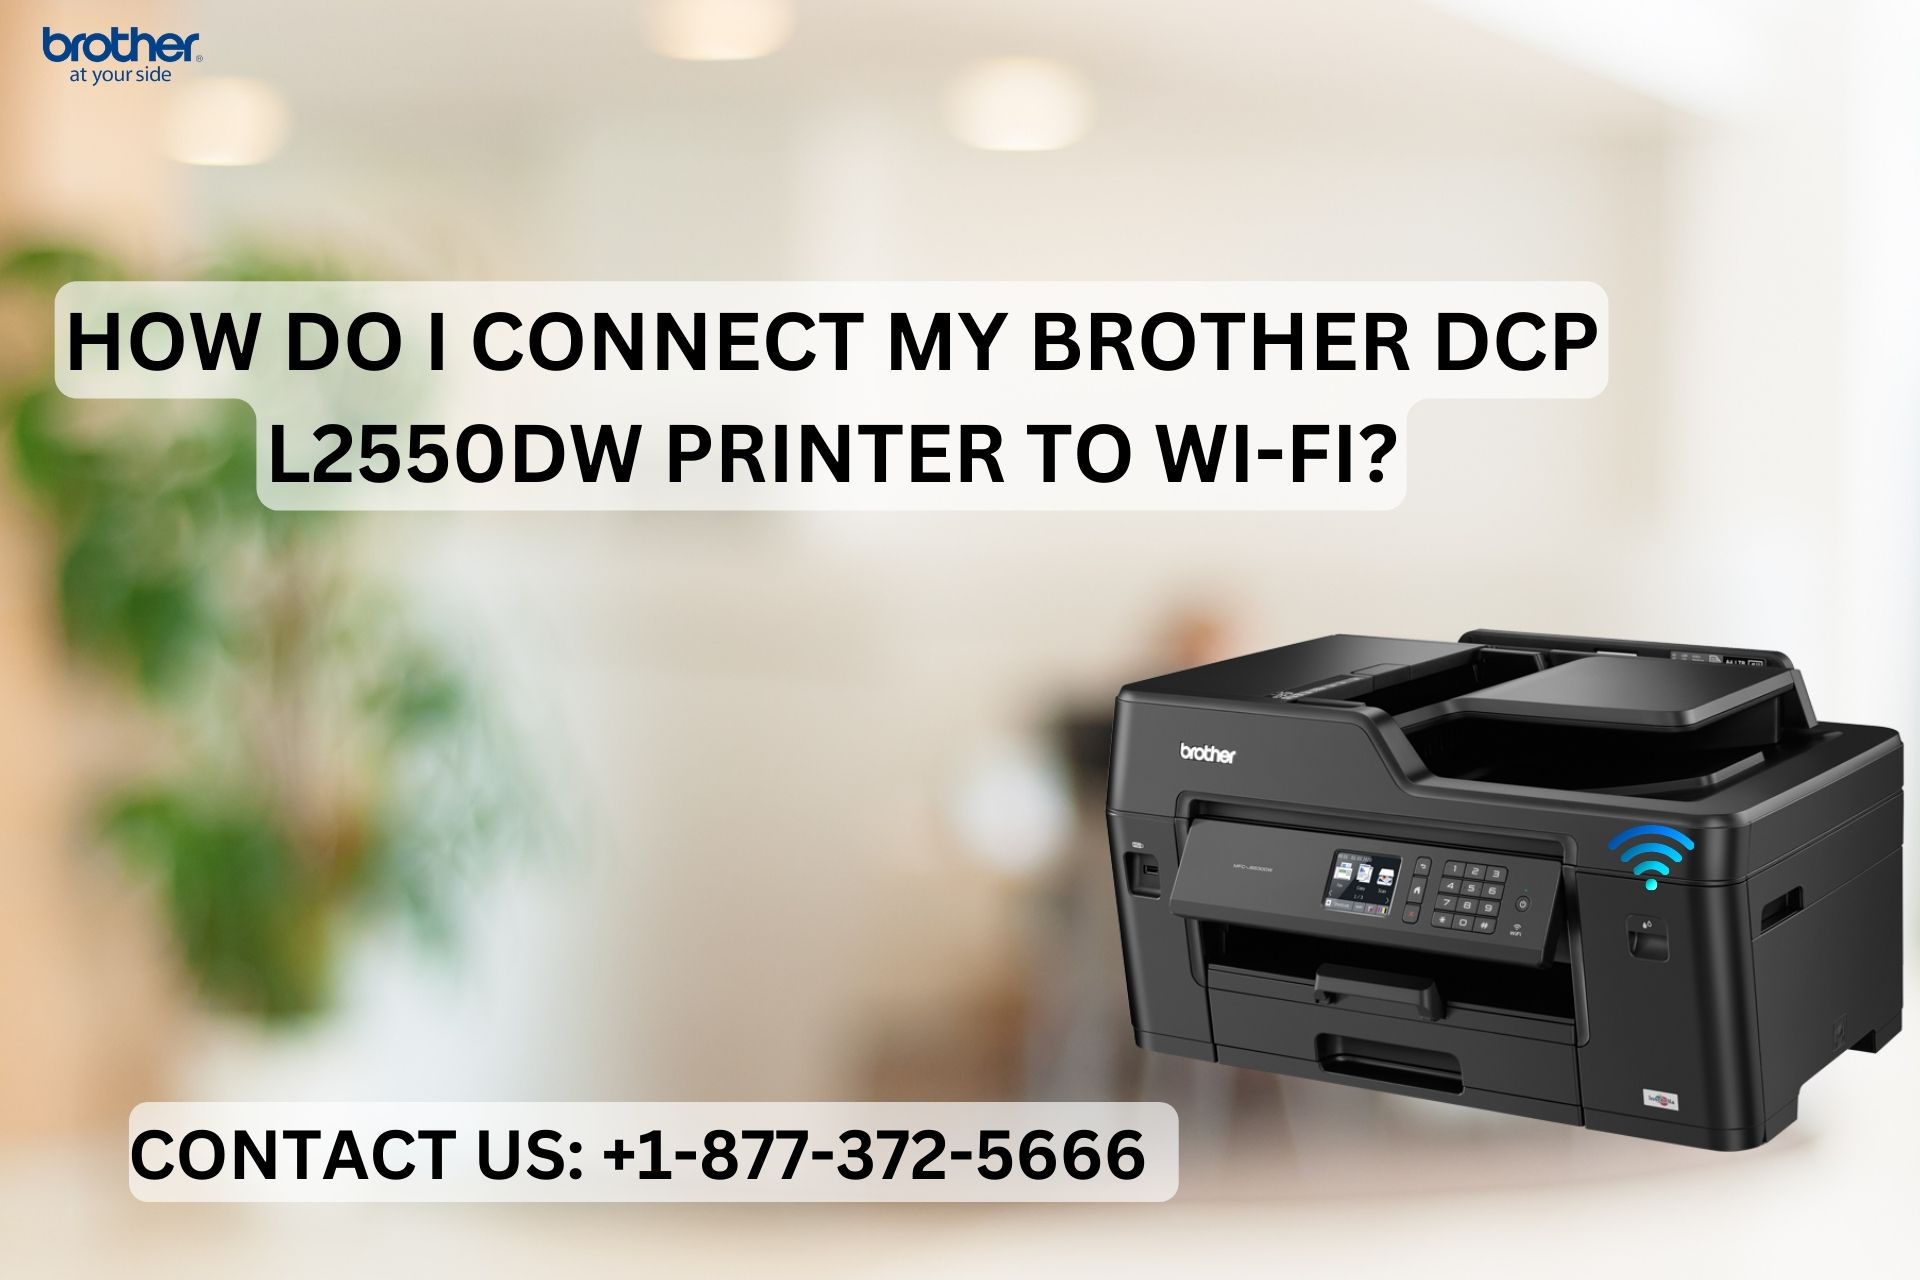  +1-877-372-5666 | How do I connect my Brother DCP l2550dw printer to Wi-Fi? | Brother Printer Support